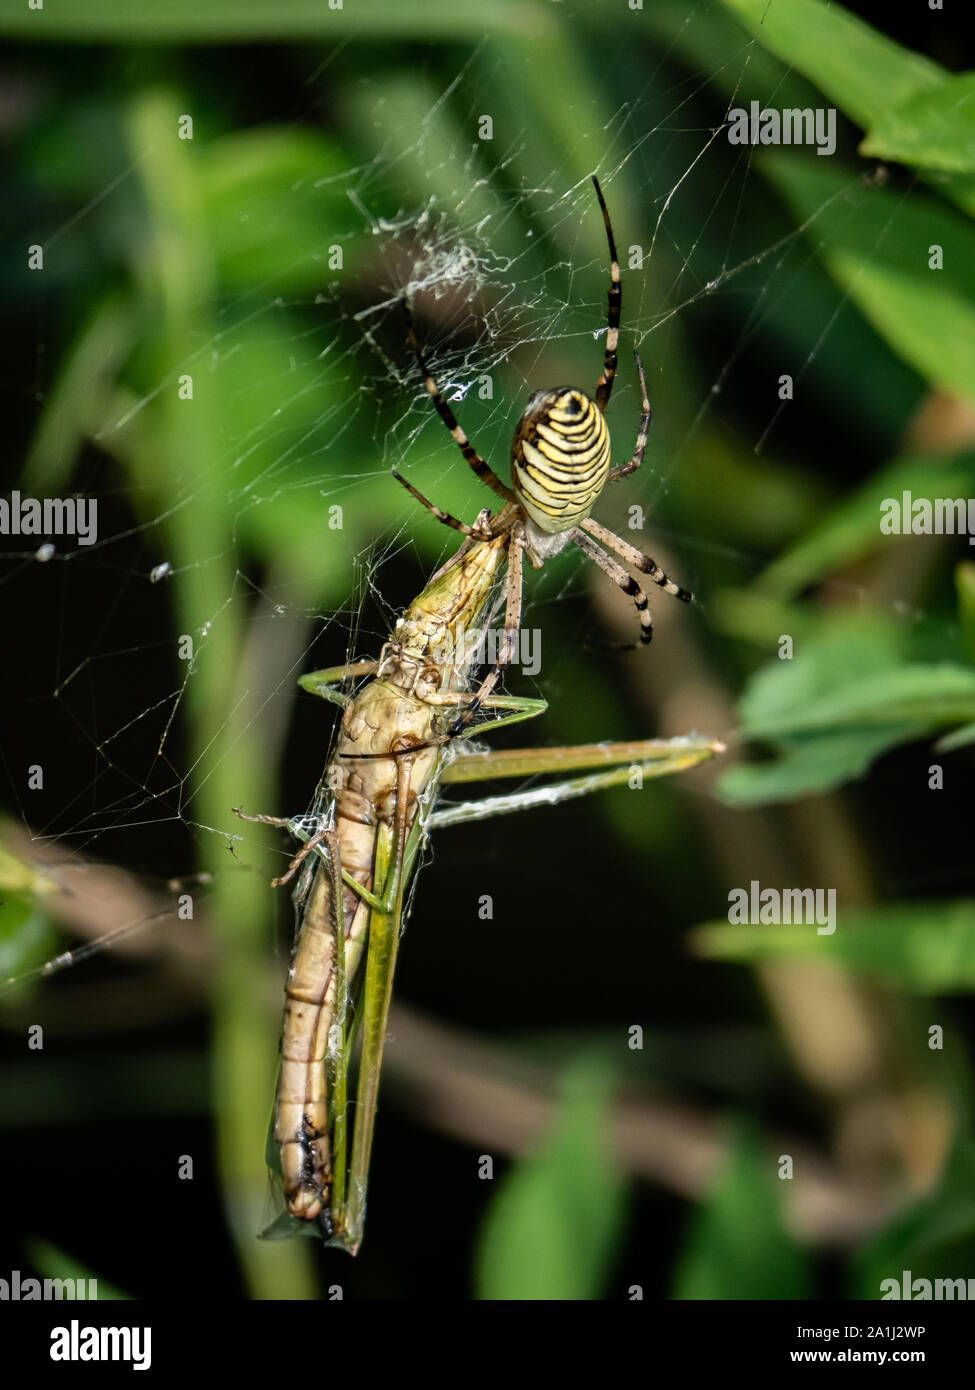 A large argiope amoena spider sits in its web feeding on a grasshopper that recently blundered into its web. Stock Photo